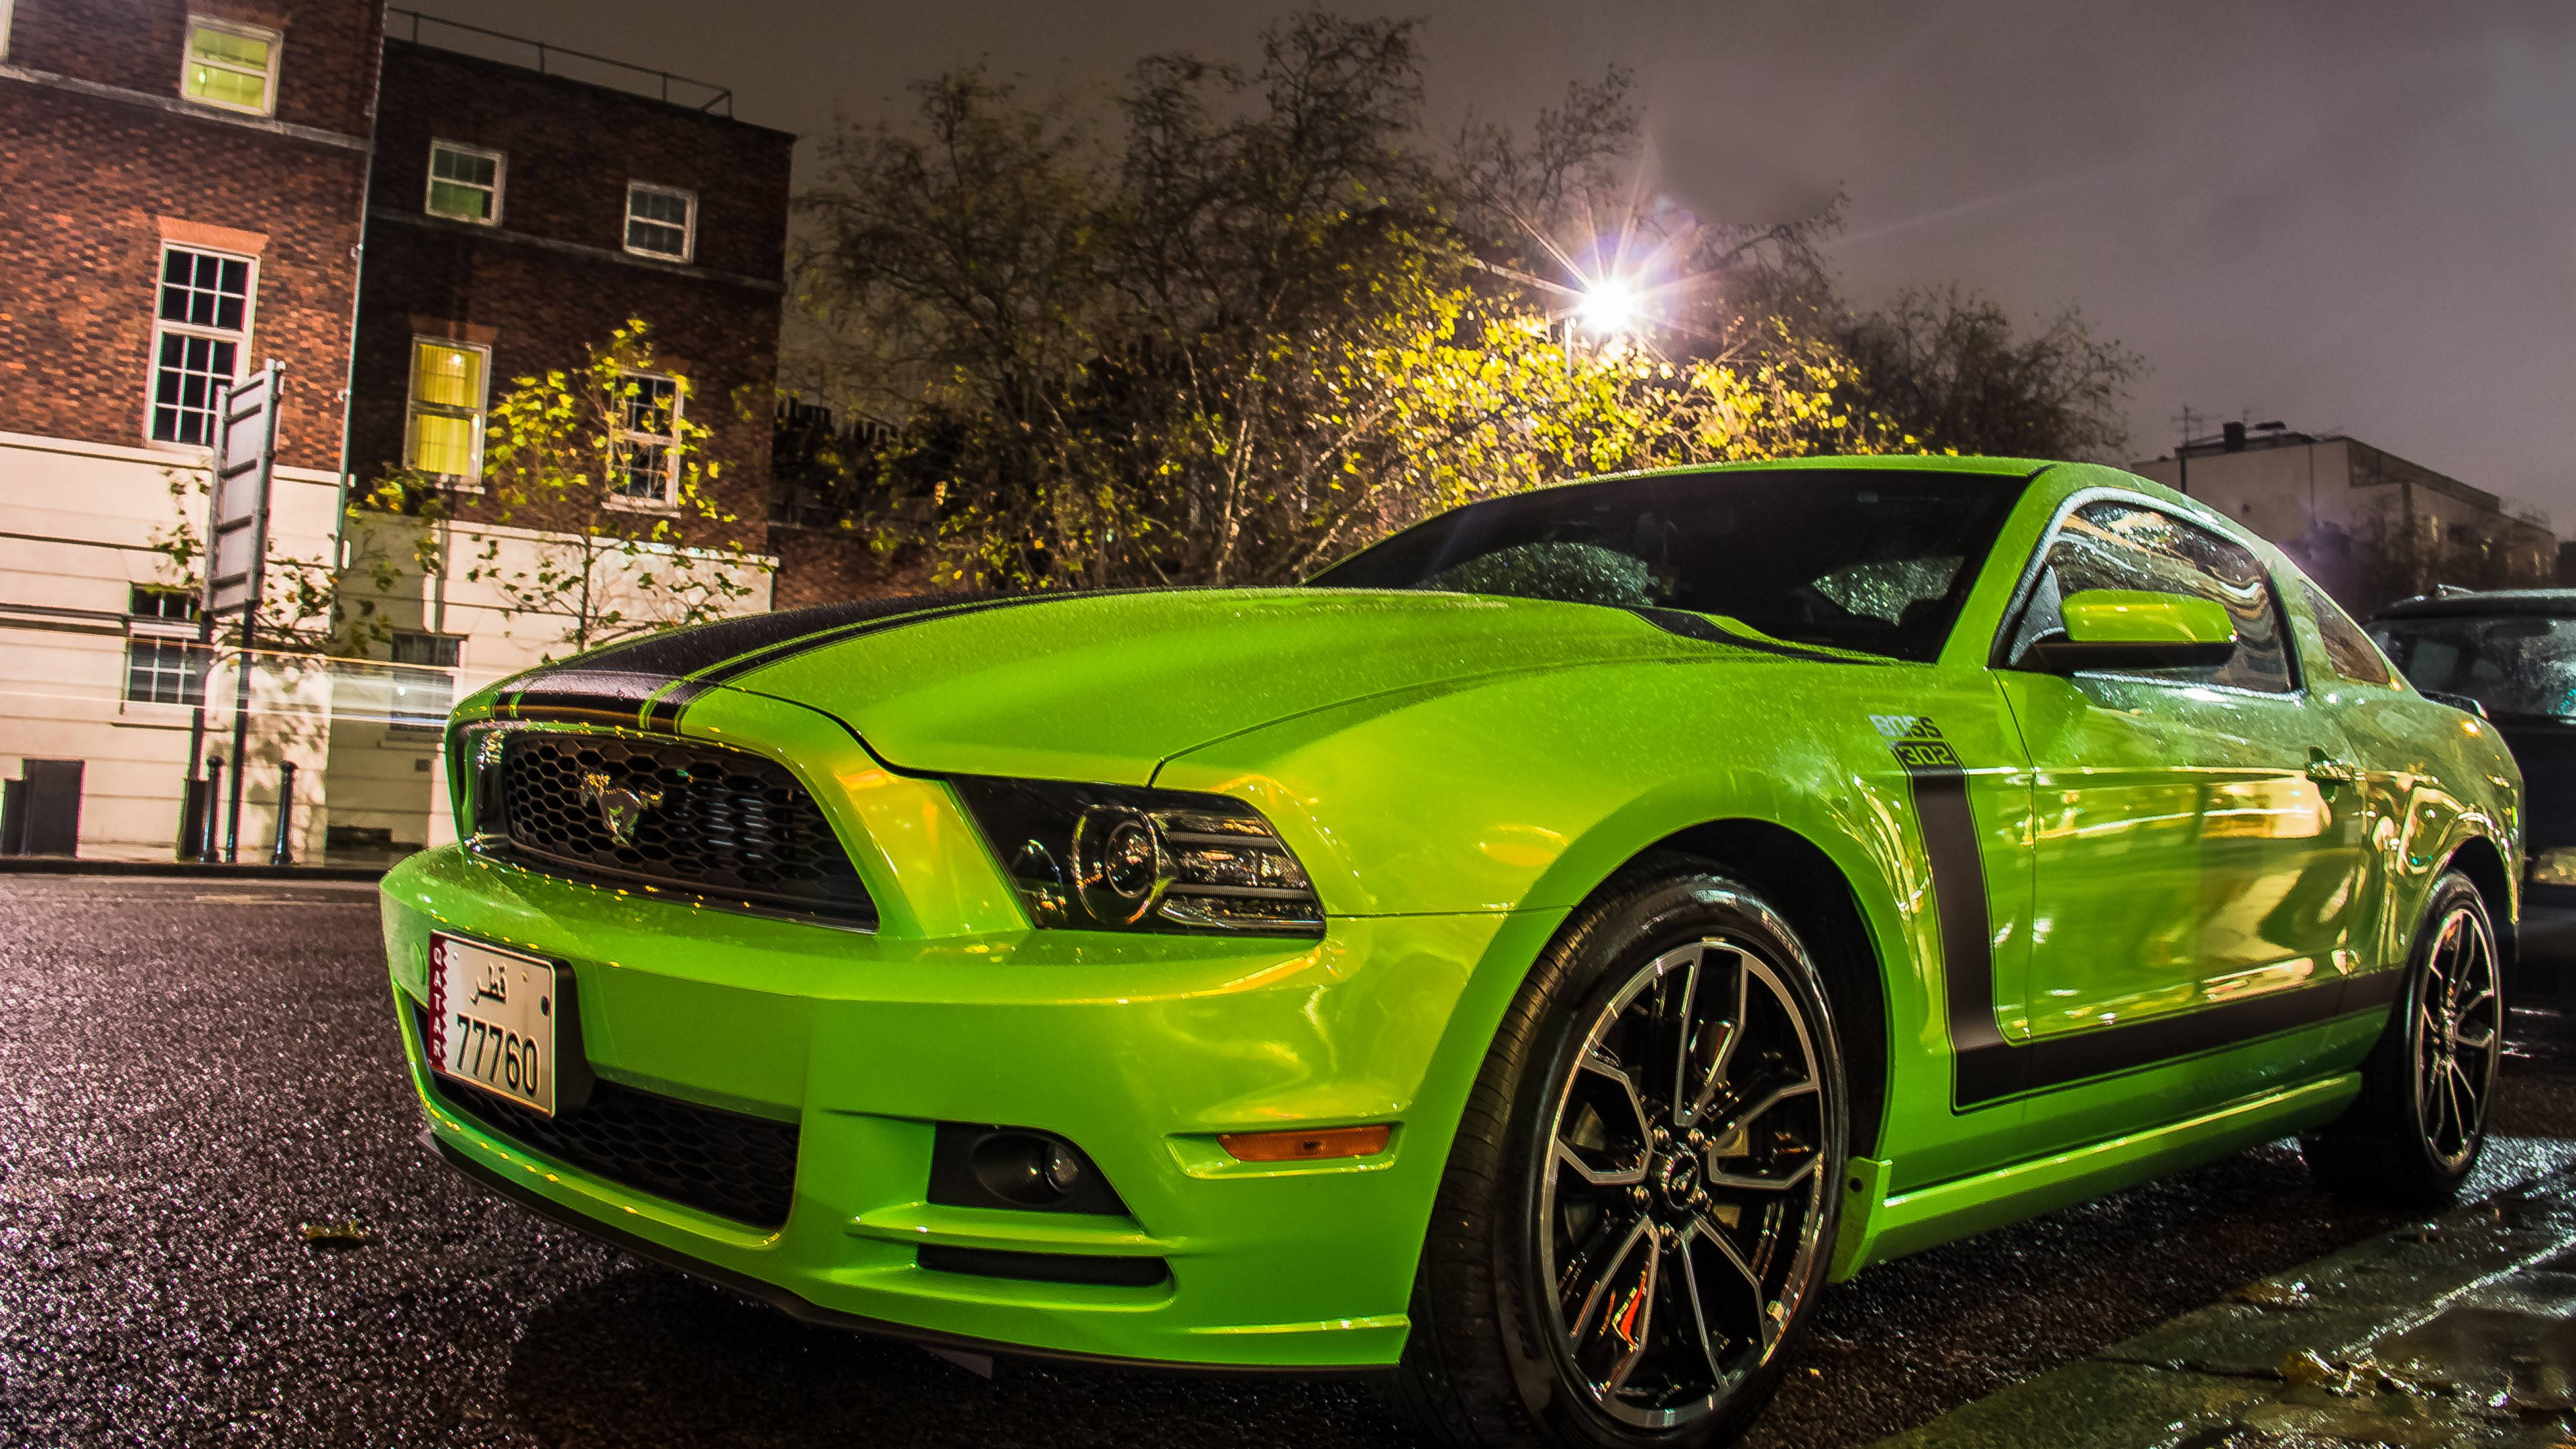 Ford Mustang Hd In Neon Green Wallpaper